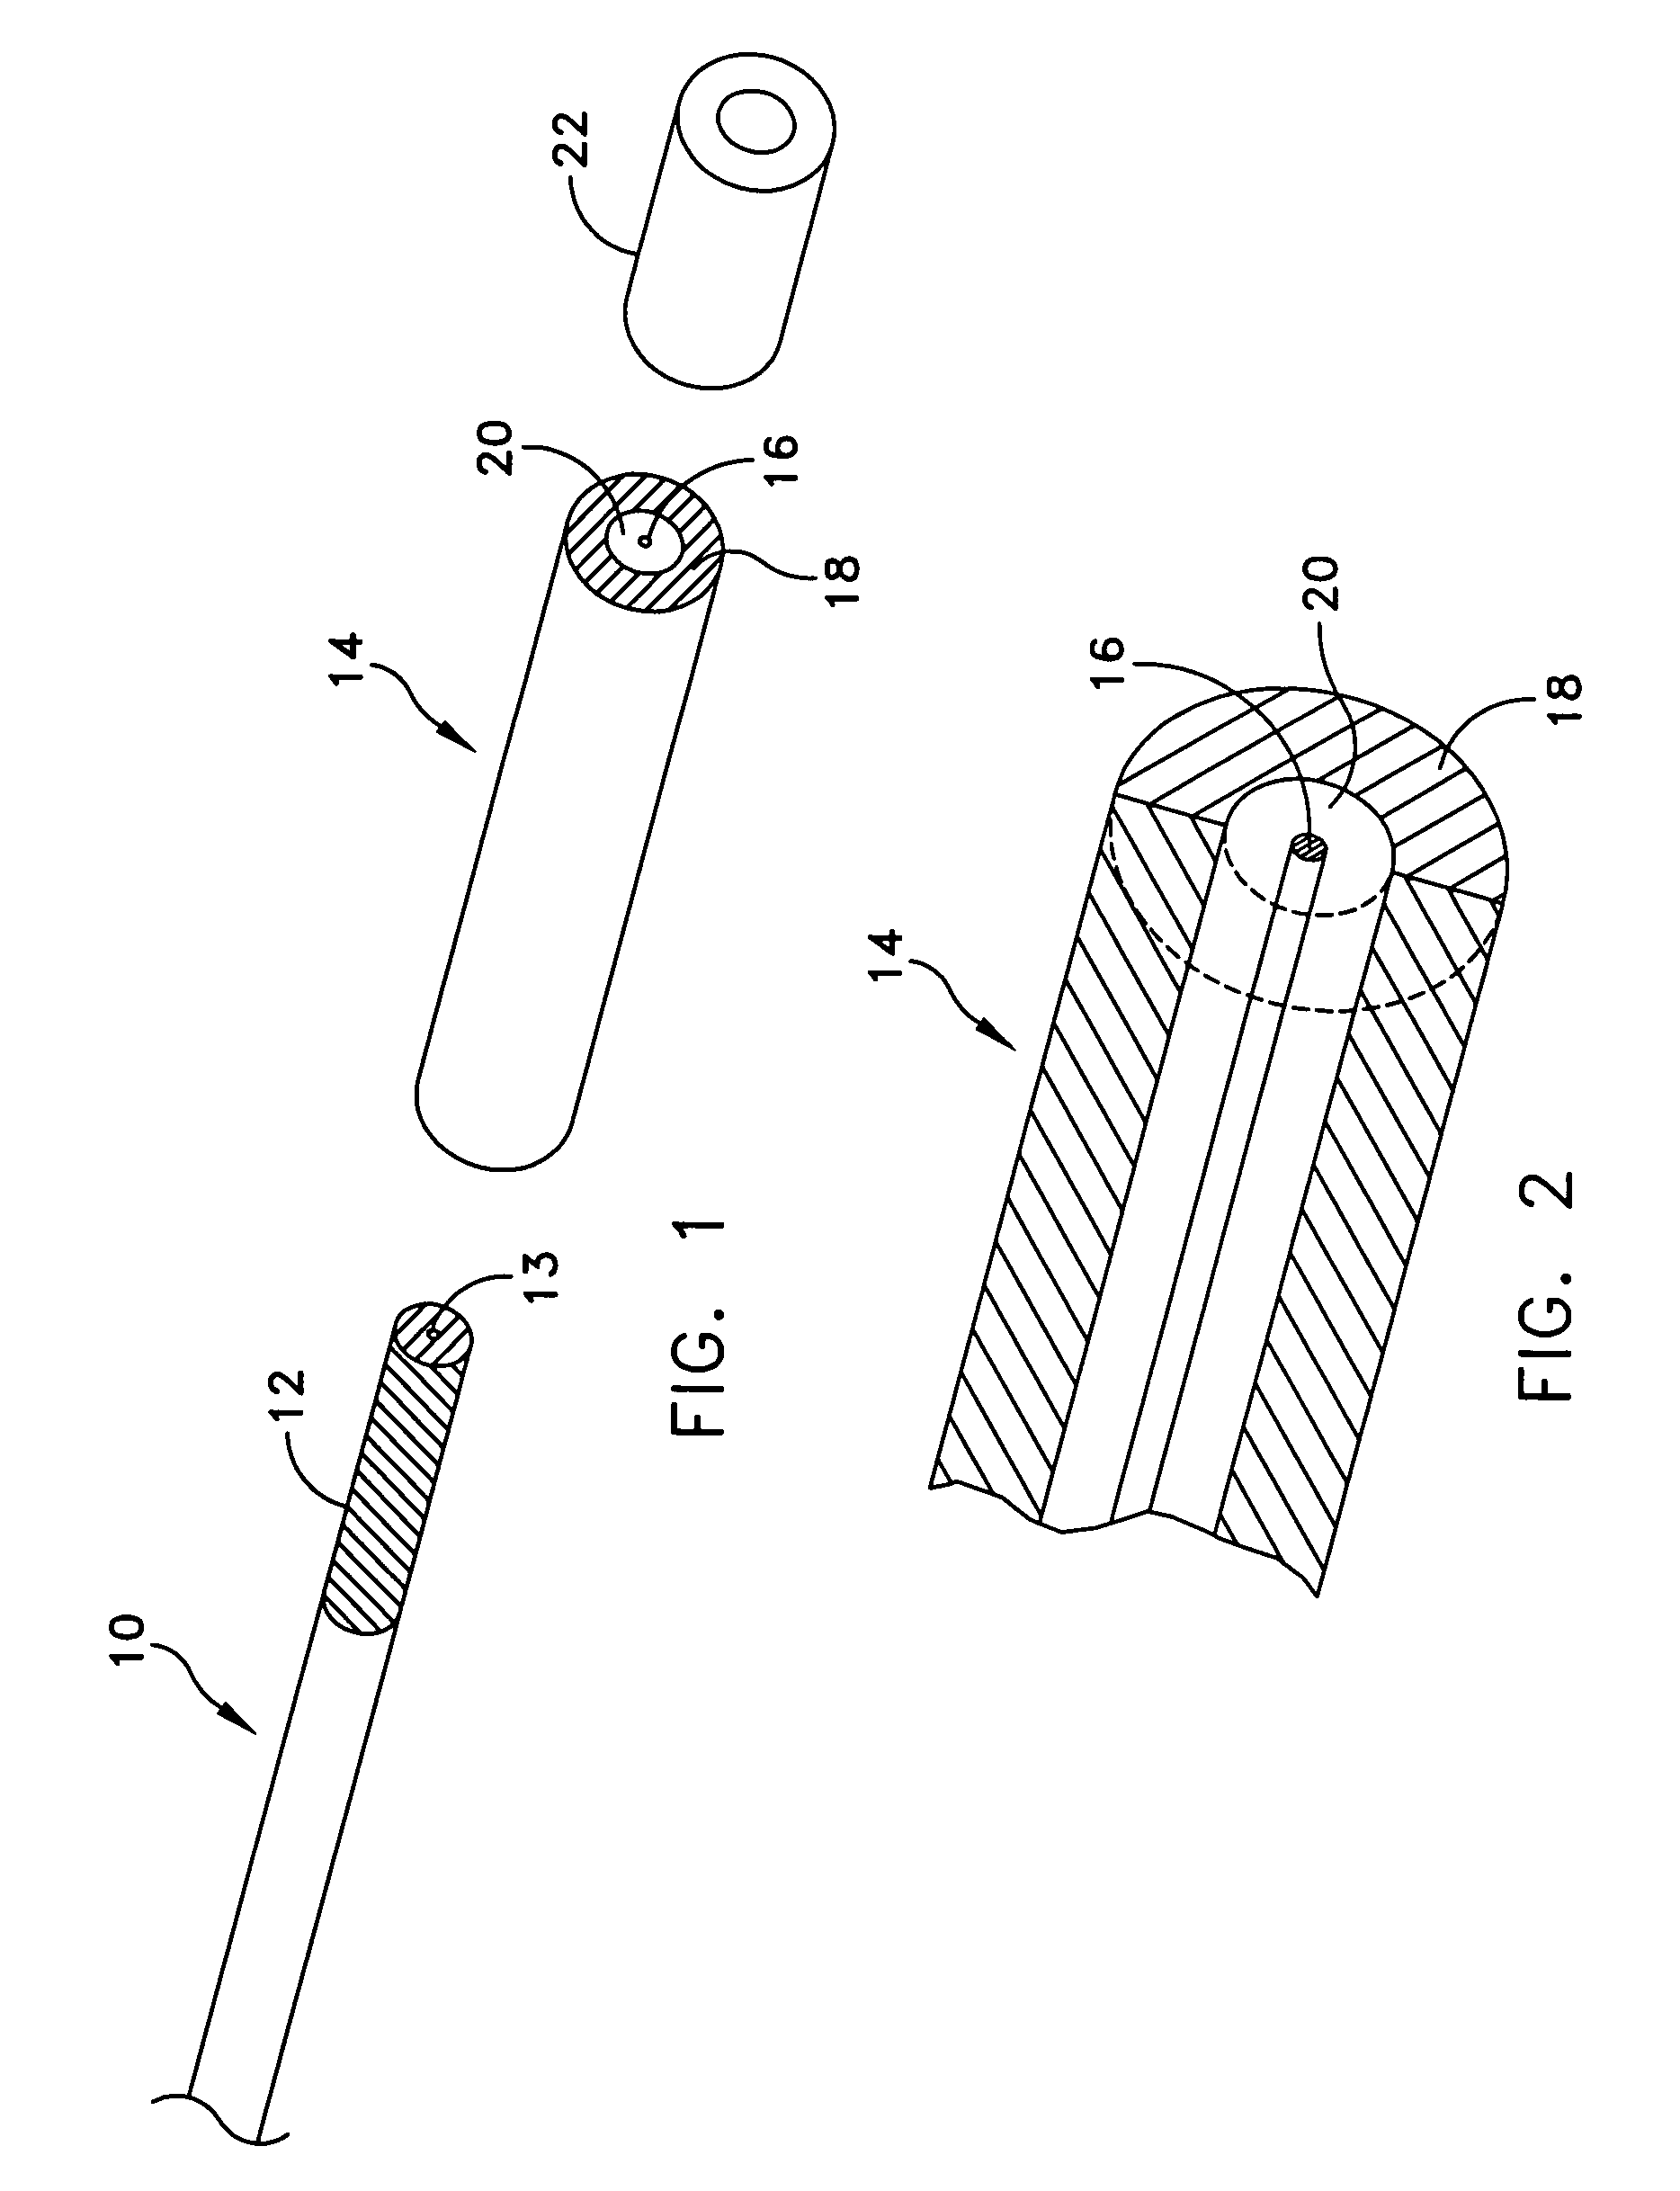 Wideband floating wire antenna using a double negative meta-material